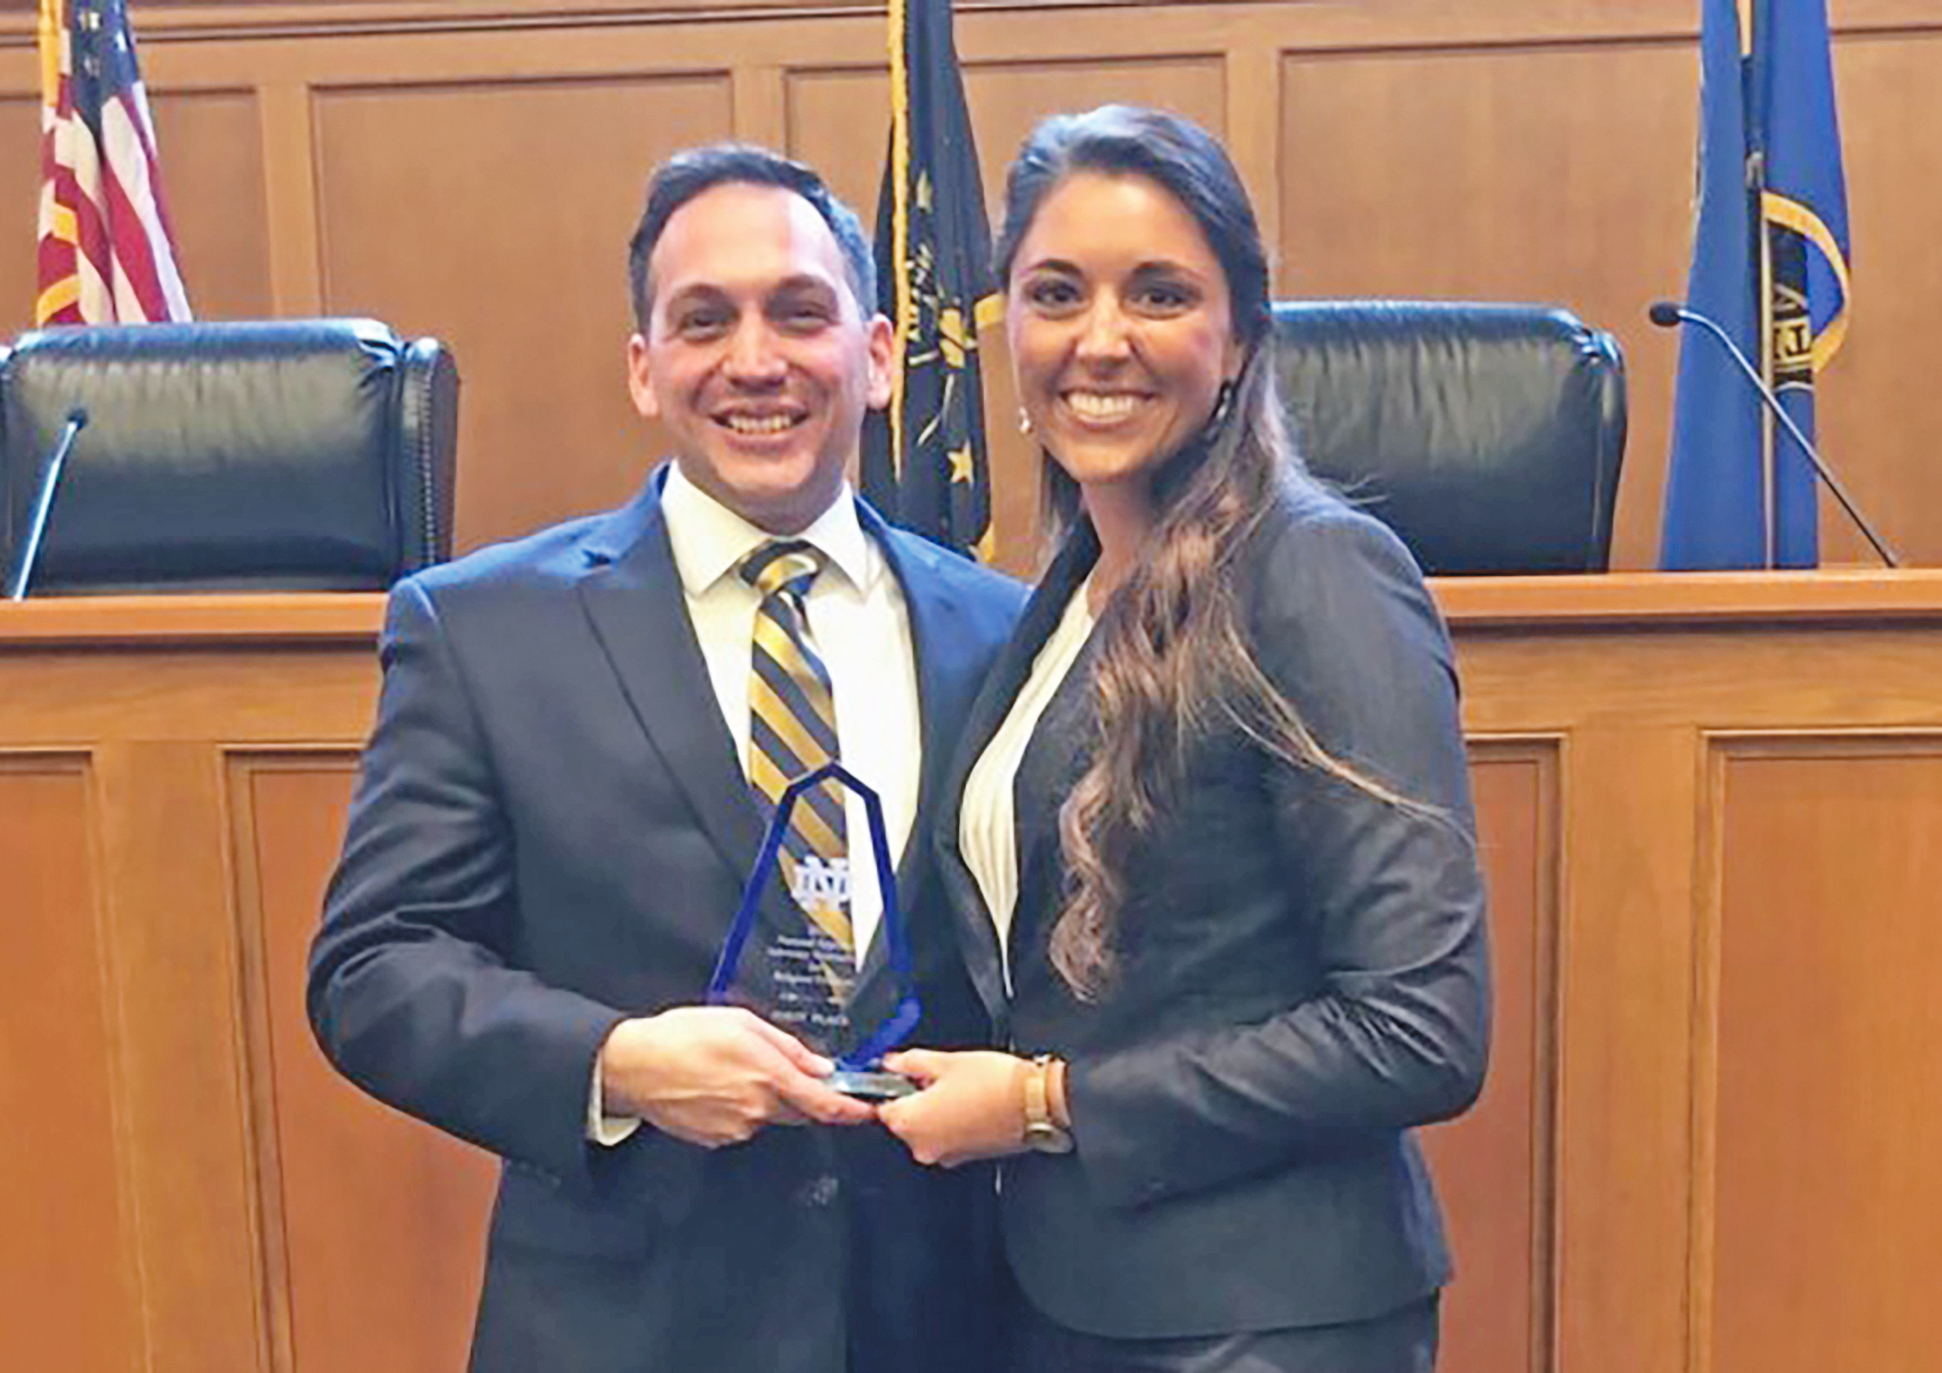 Xavier Romero and Summer Robbins of Florida Coastal School of Law show off the trophy after their team won the Notre Dame Religious Freedom National Moot Court Competition.